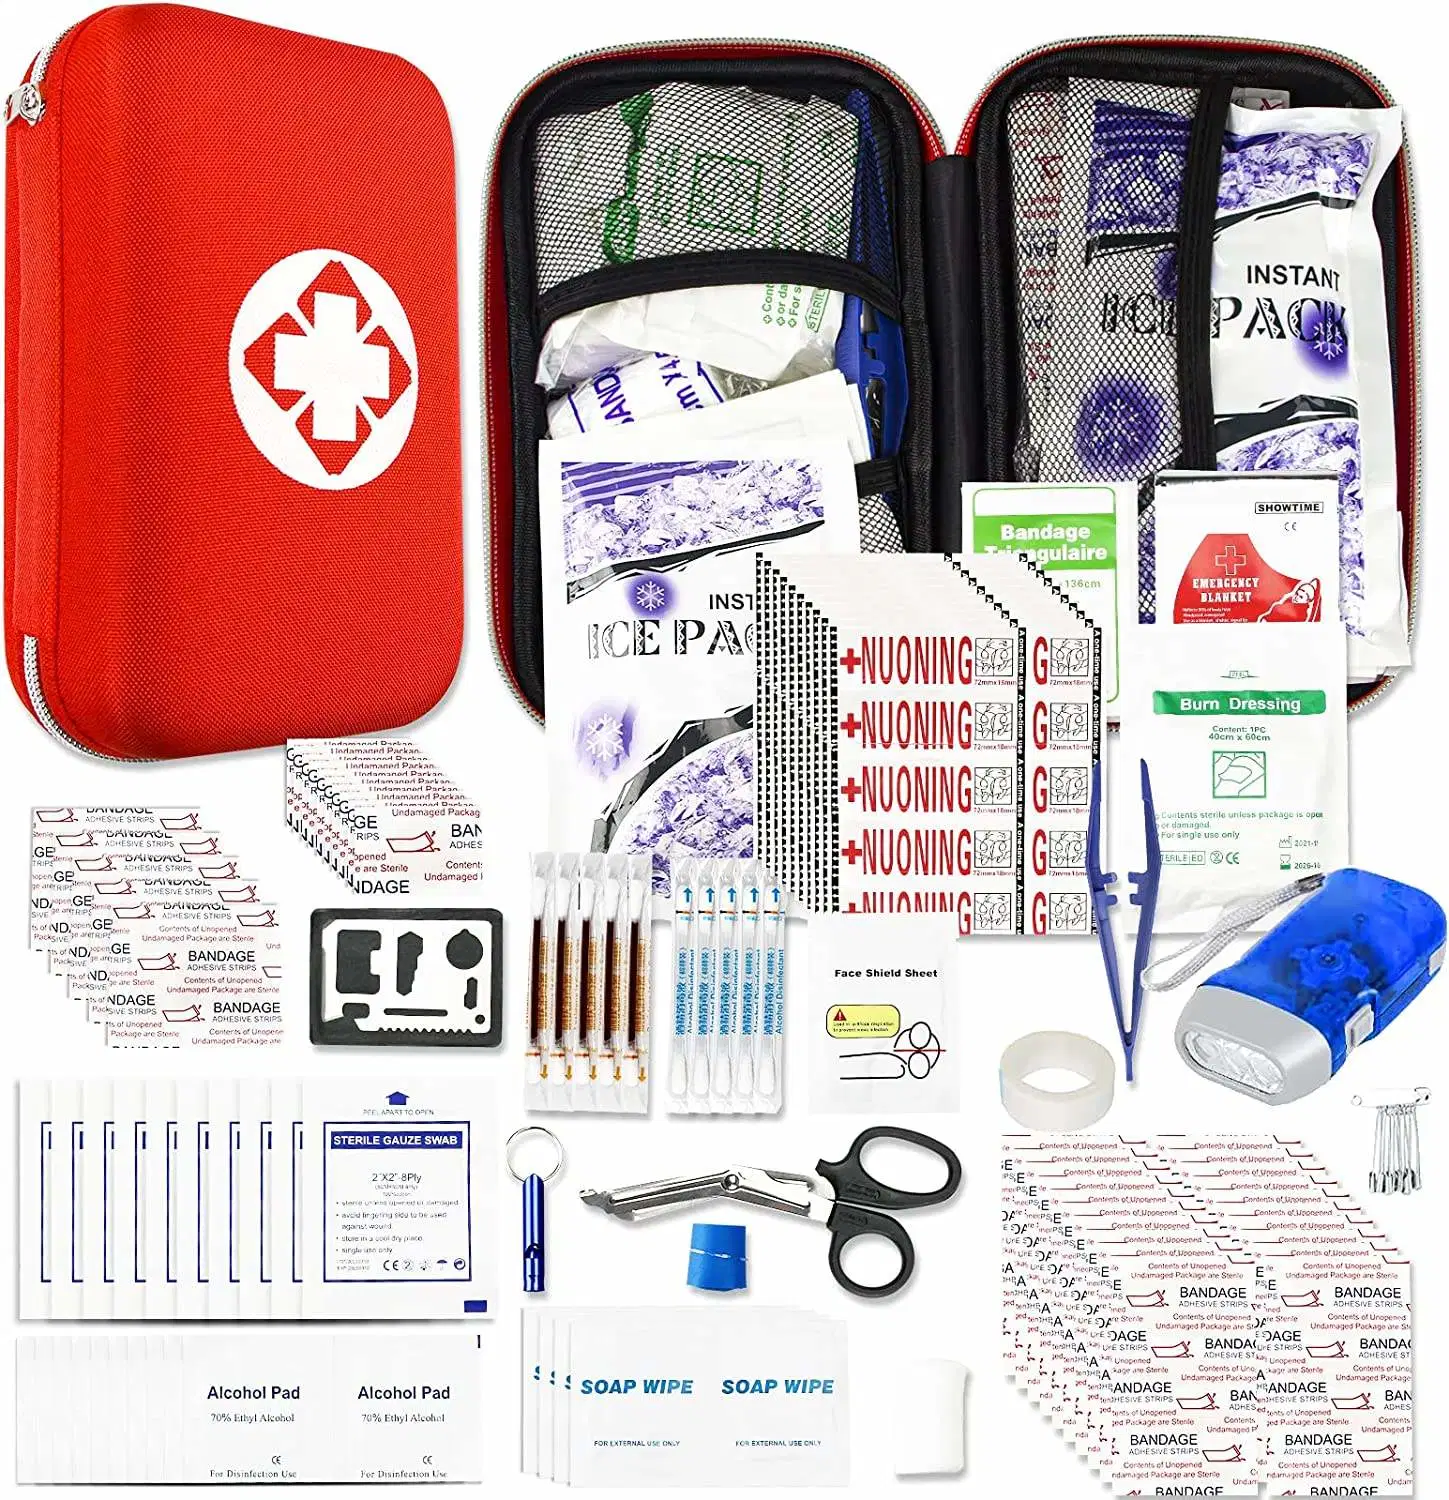 Office Brother Medical Carton Shanghai Kit First Aid with FDA Bme01